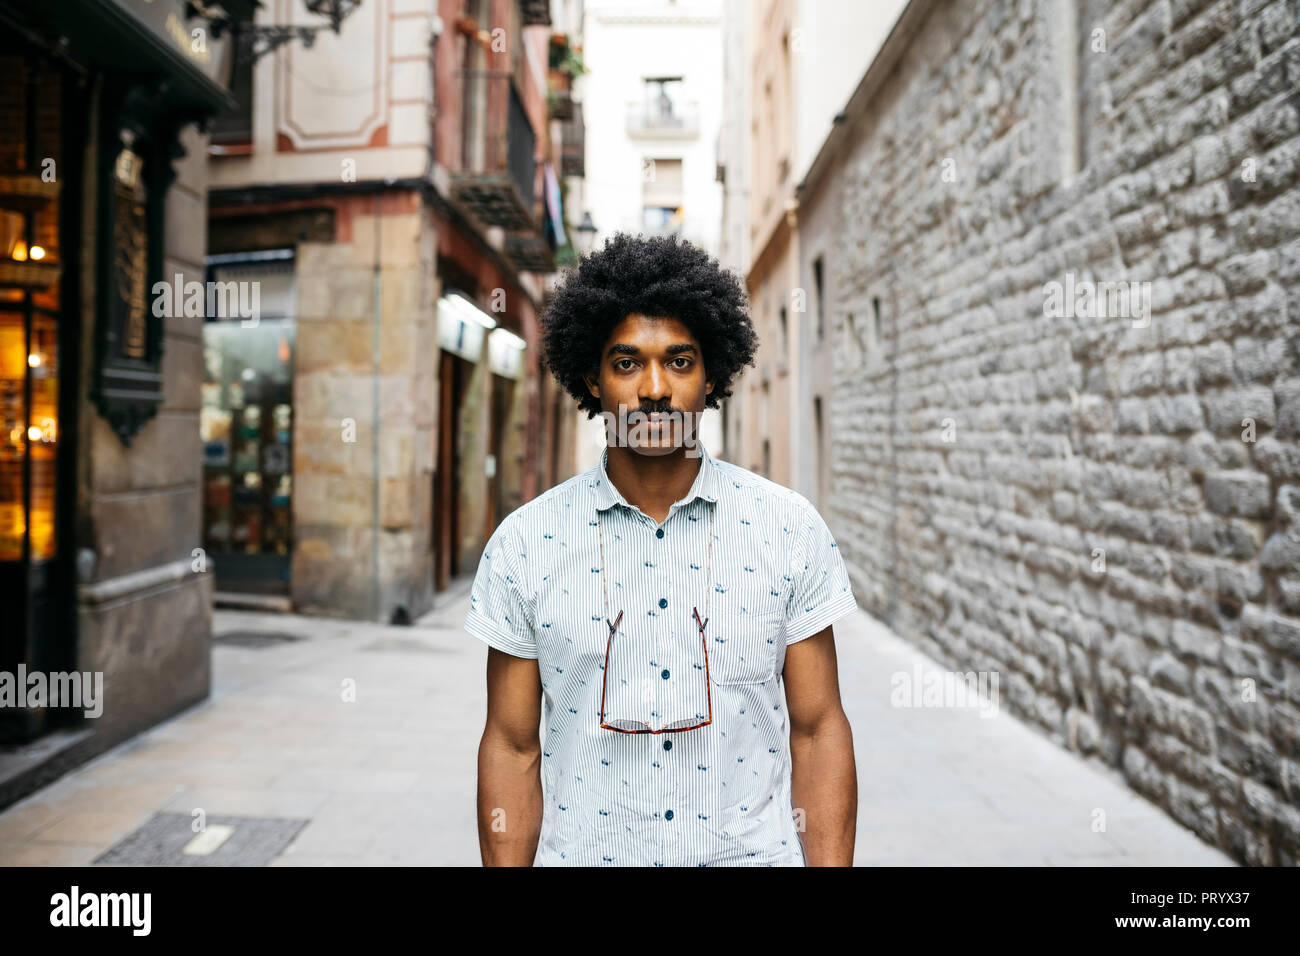 Spain, Barcelona, portrait of man with moustache and curly hair Stock Photo